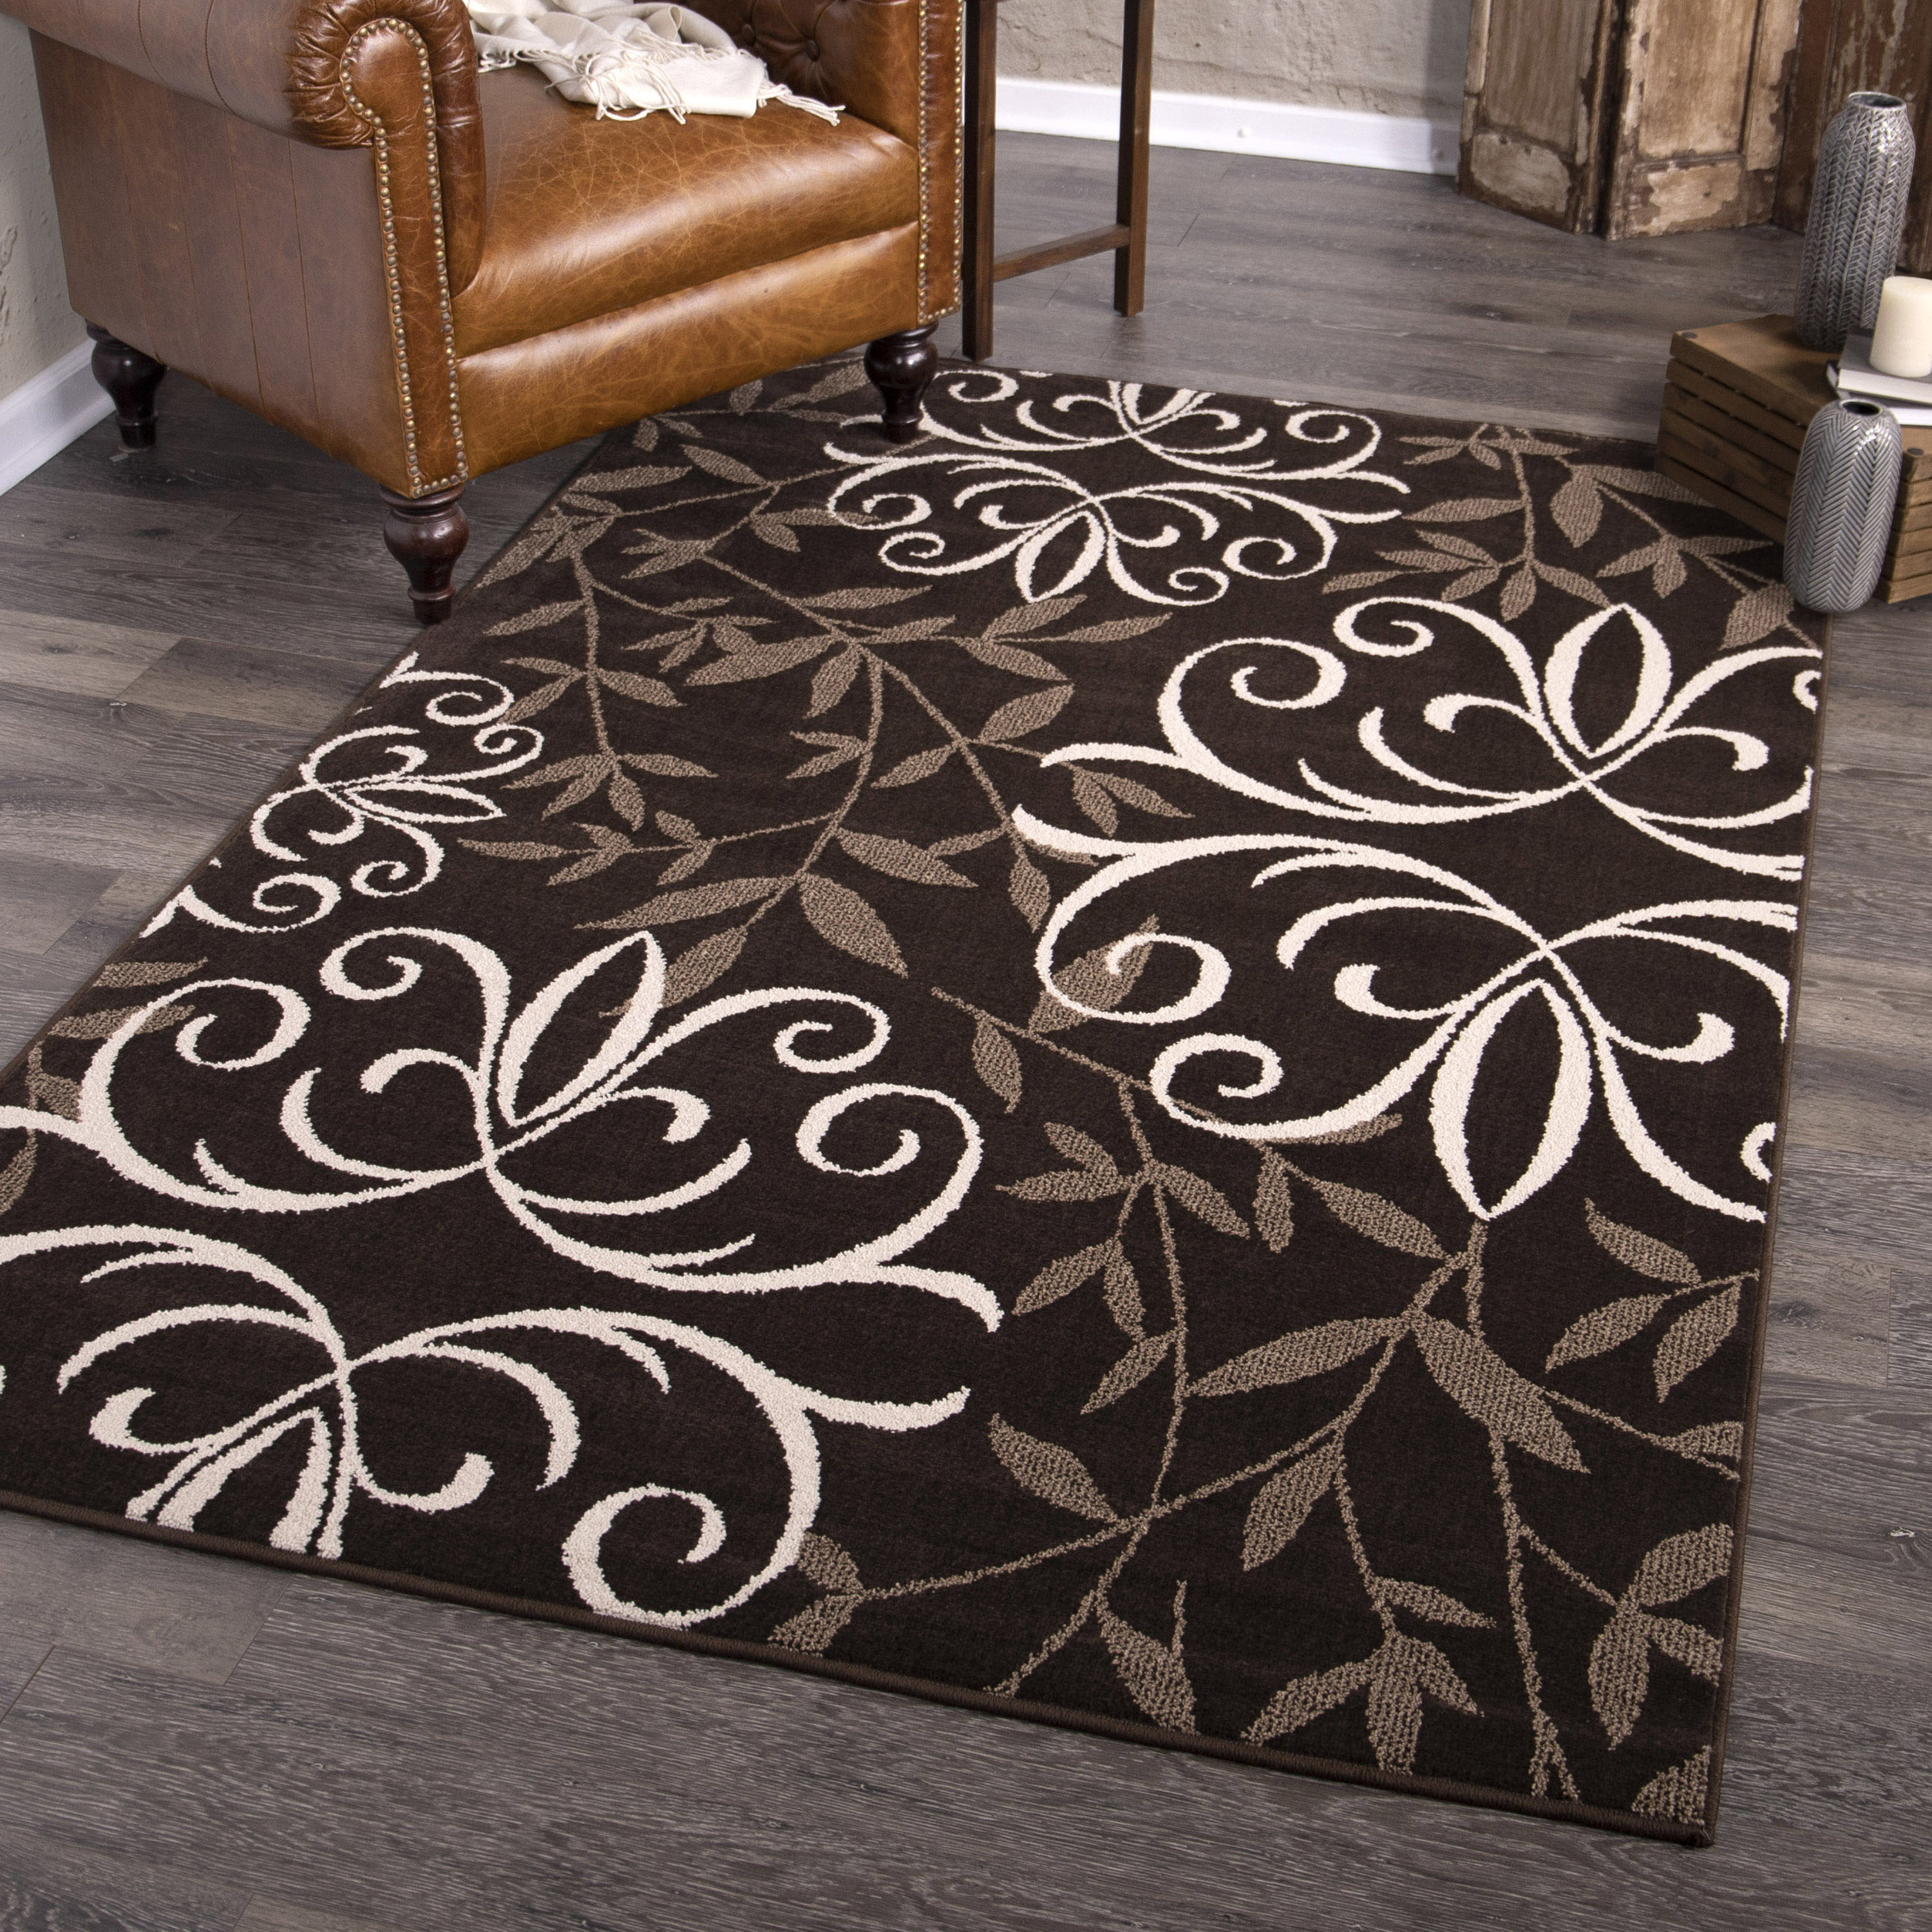 Better Homes & Gardens Iron Fleur Area Rug, Brown, 7'6" x 9'6" - image 1 of 9